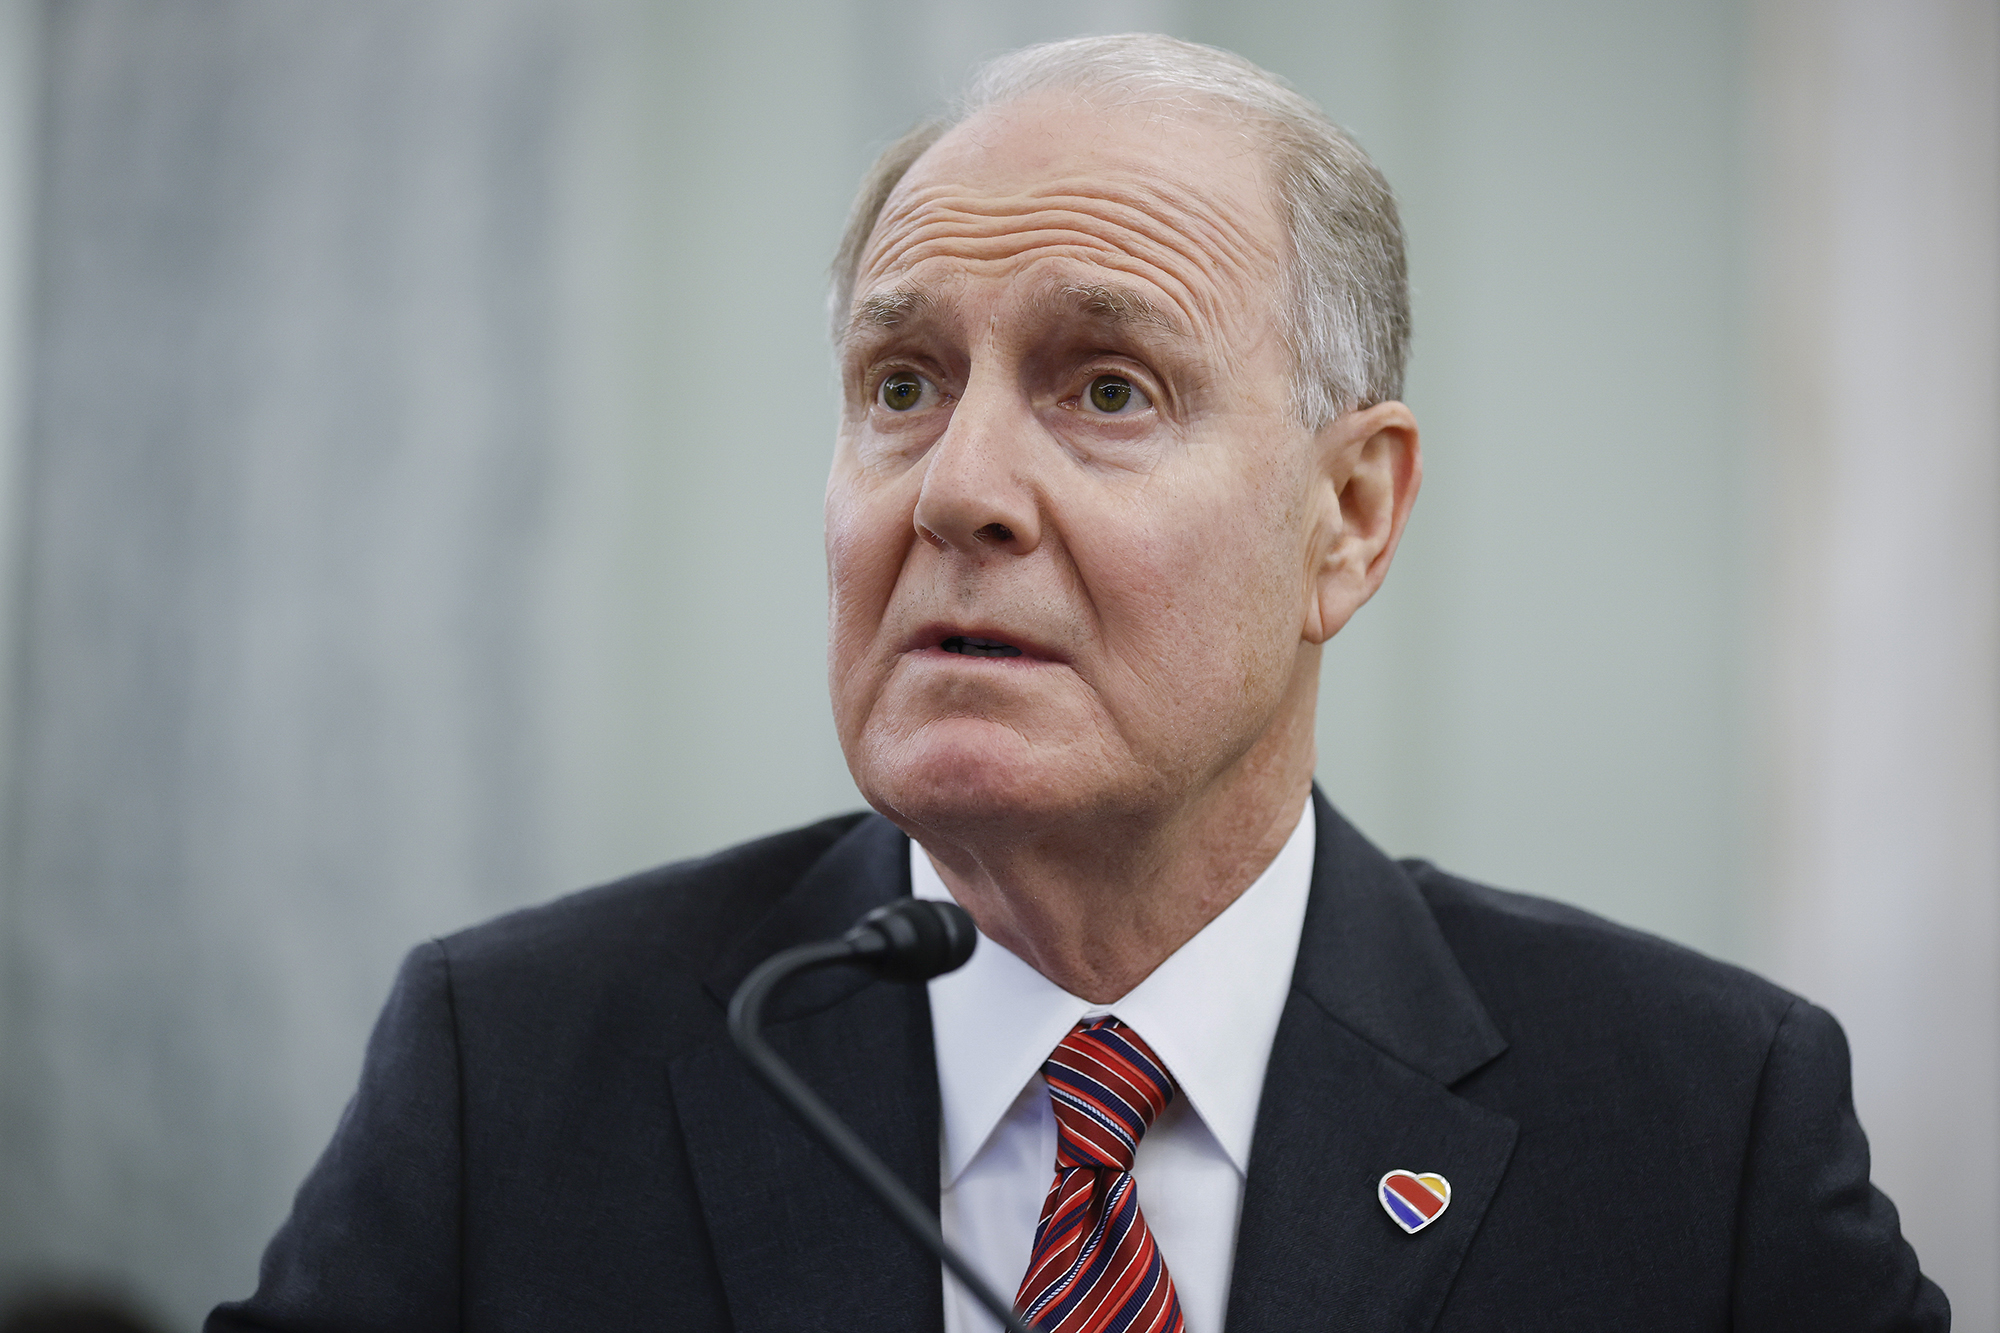 Southwest Airlines CEO Gary Kelly testifies before the Senate Commerce, Science, and Transportation in the Russell Senate Office Building on Capitol Hill.